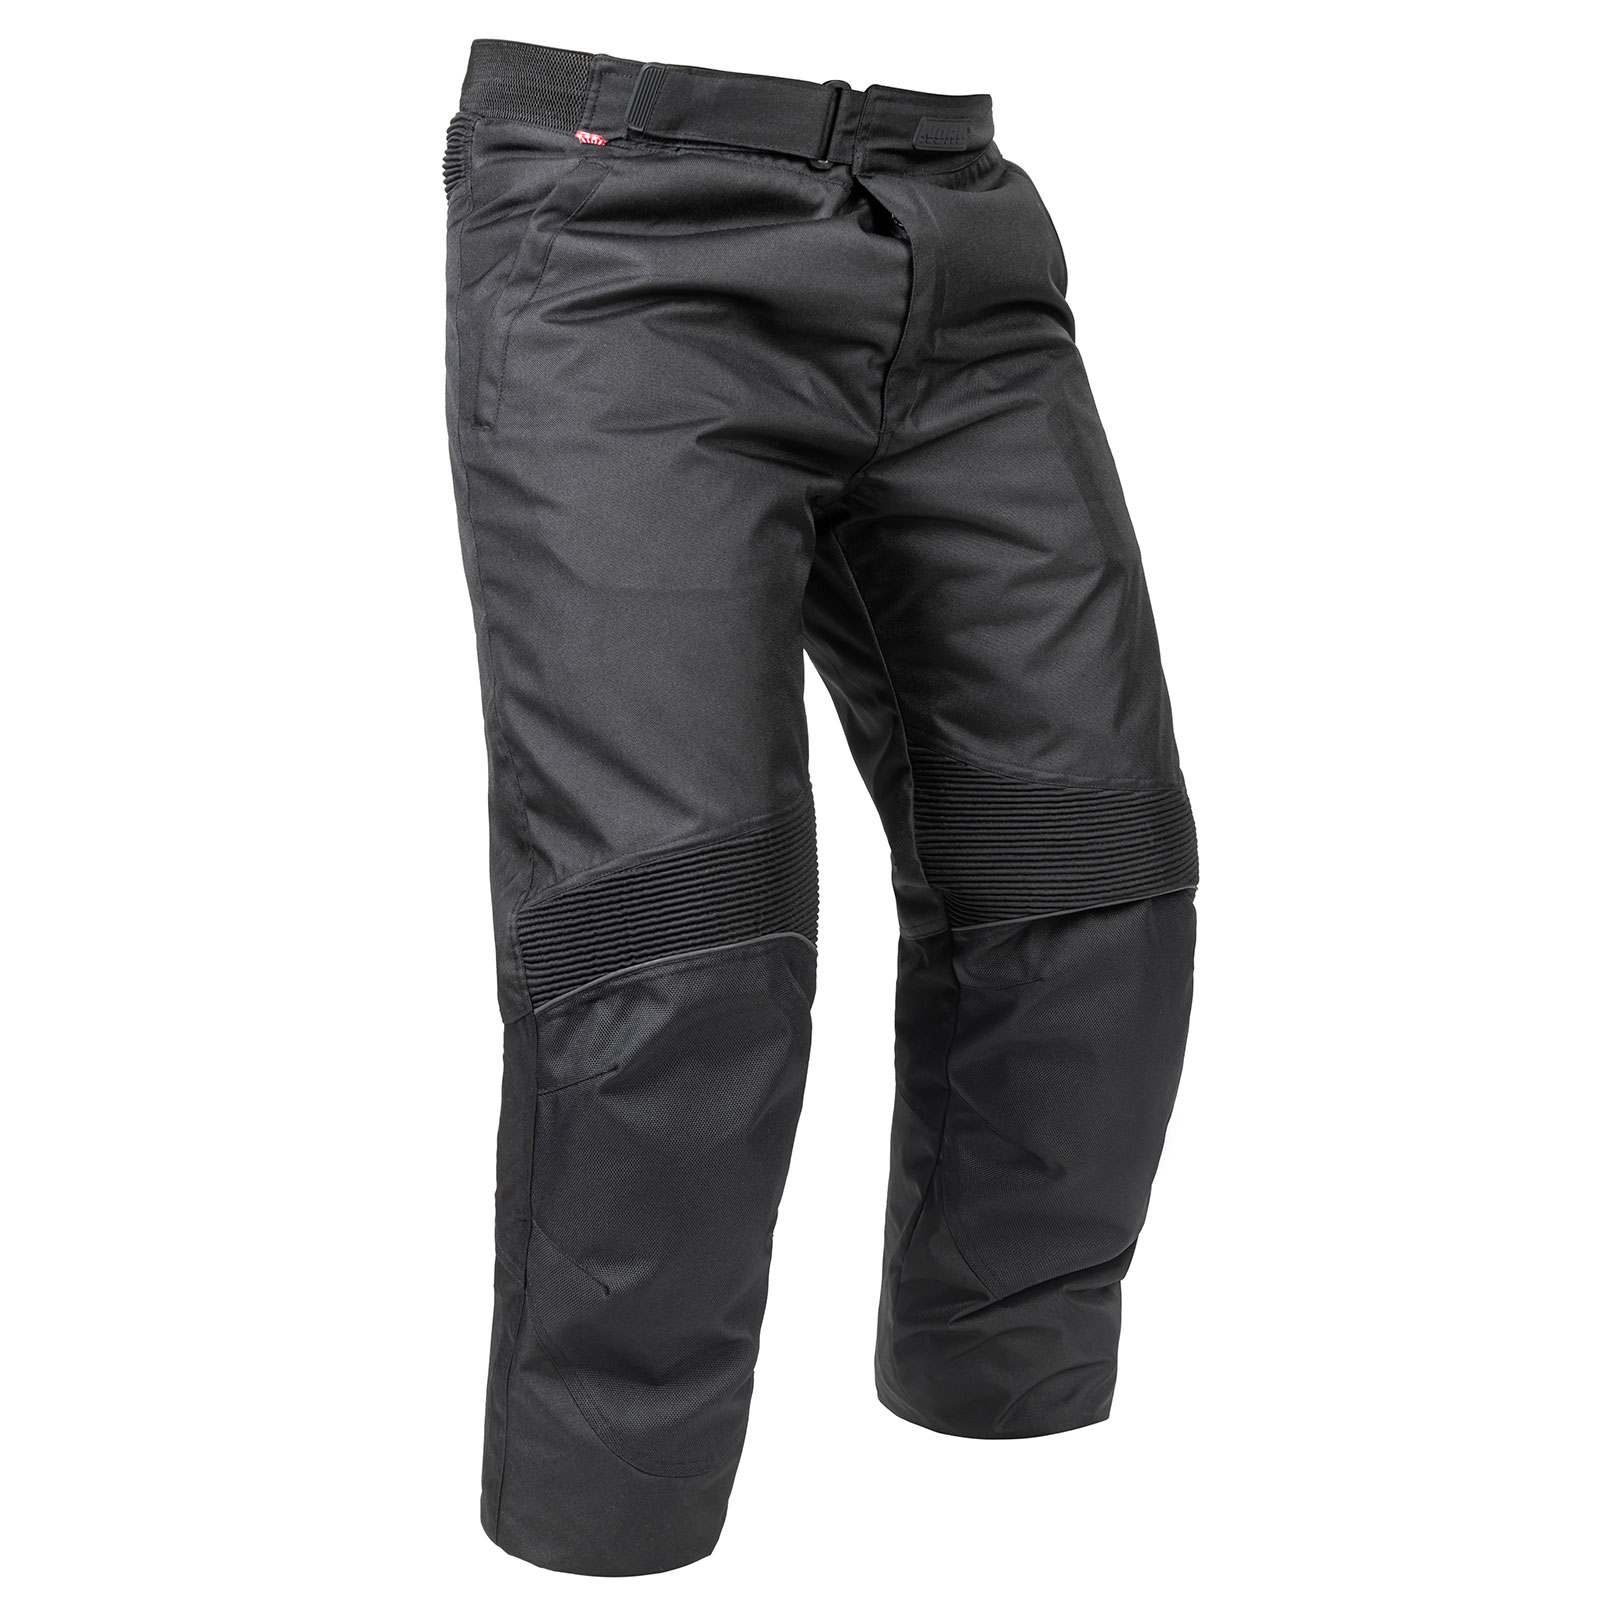 Richa Cyclone Gore-Tex Textile Motorcycle Trousers - FREE UK DELIVERY &  RETURNS - JTS Biker Clothing